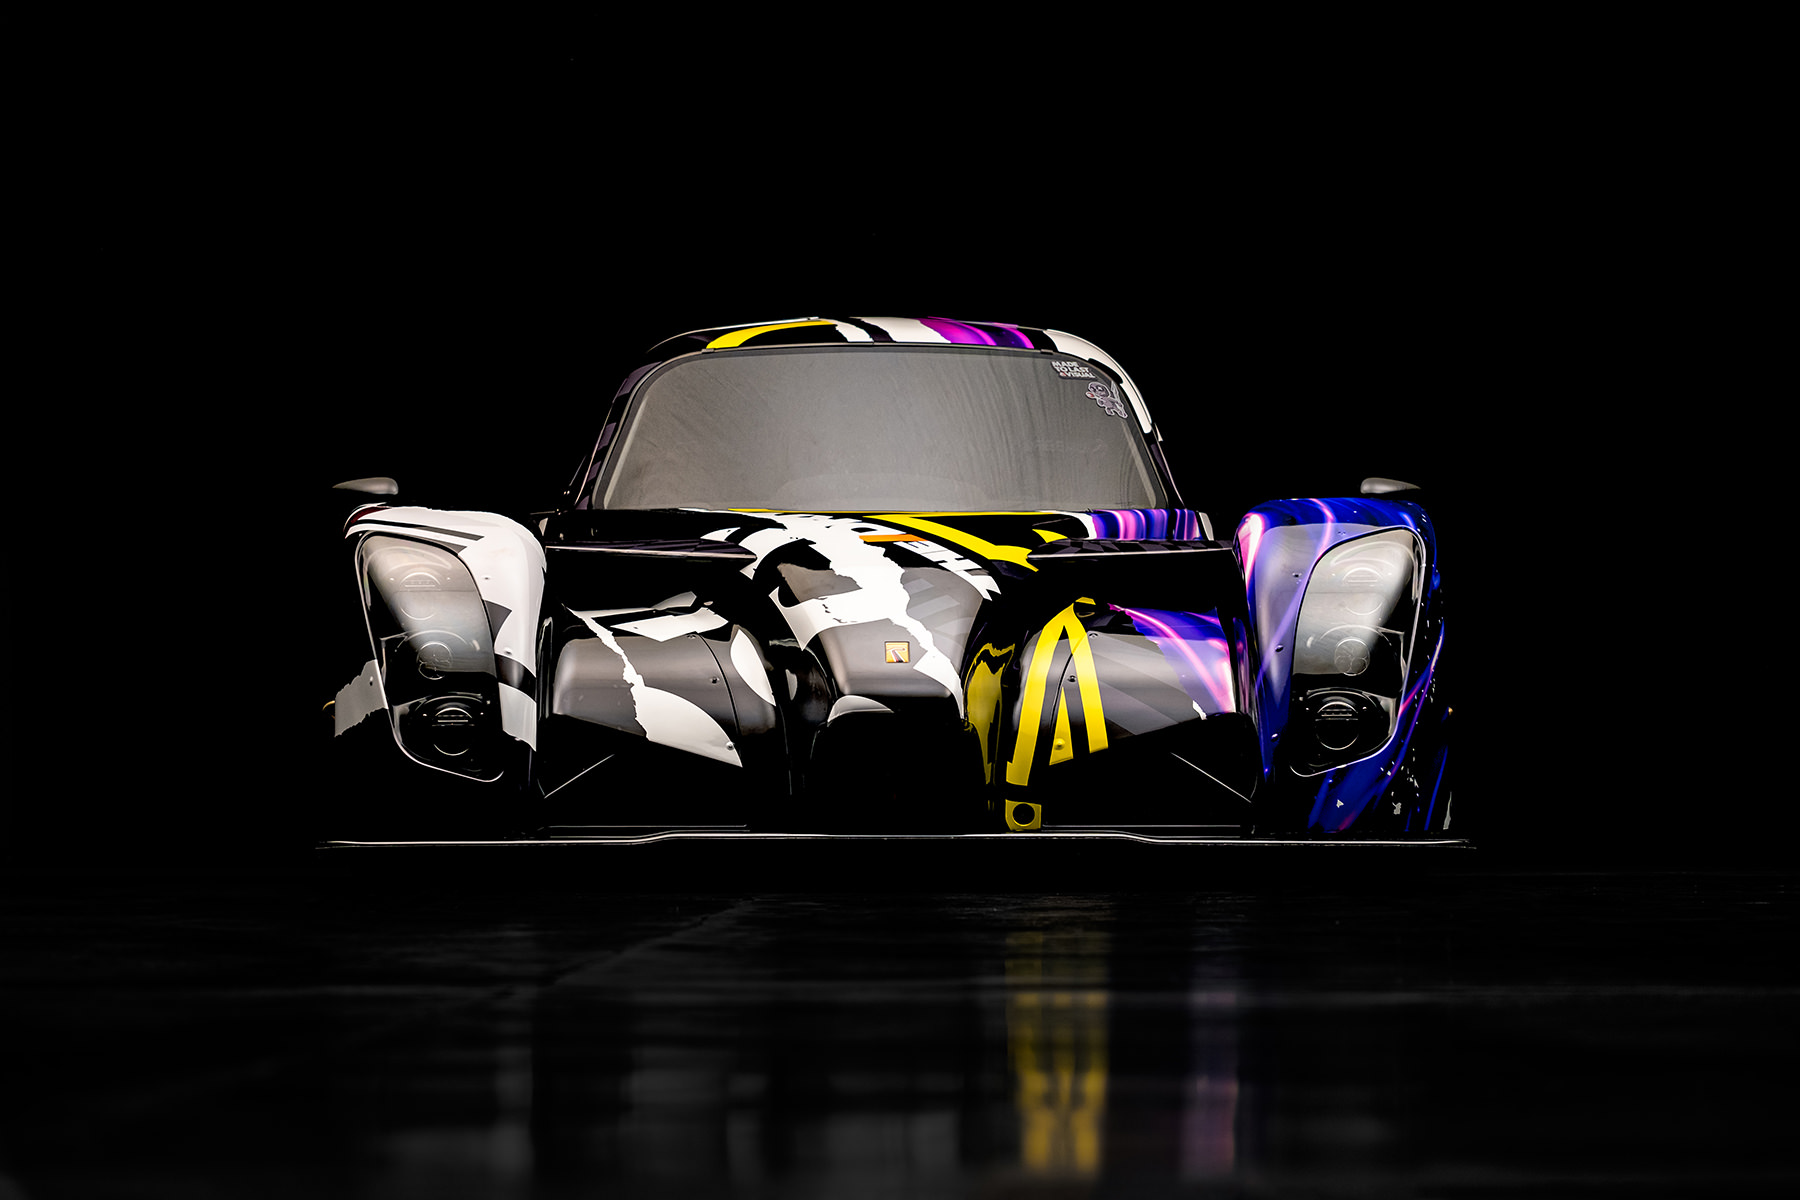 A front view of the livery graphics for the Radical RXC racecar